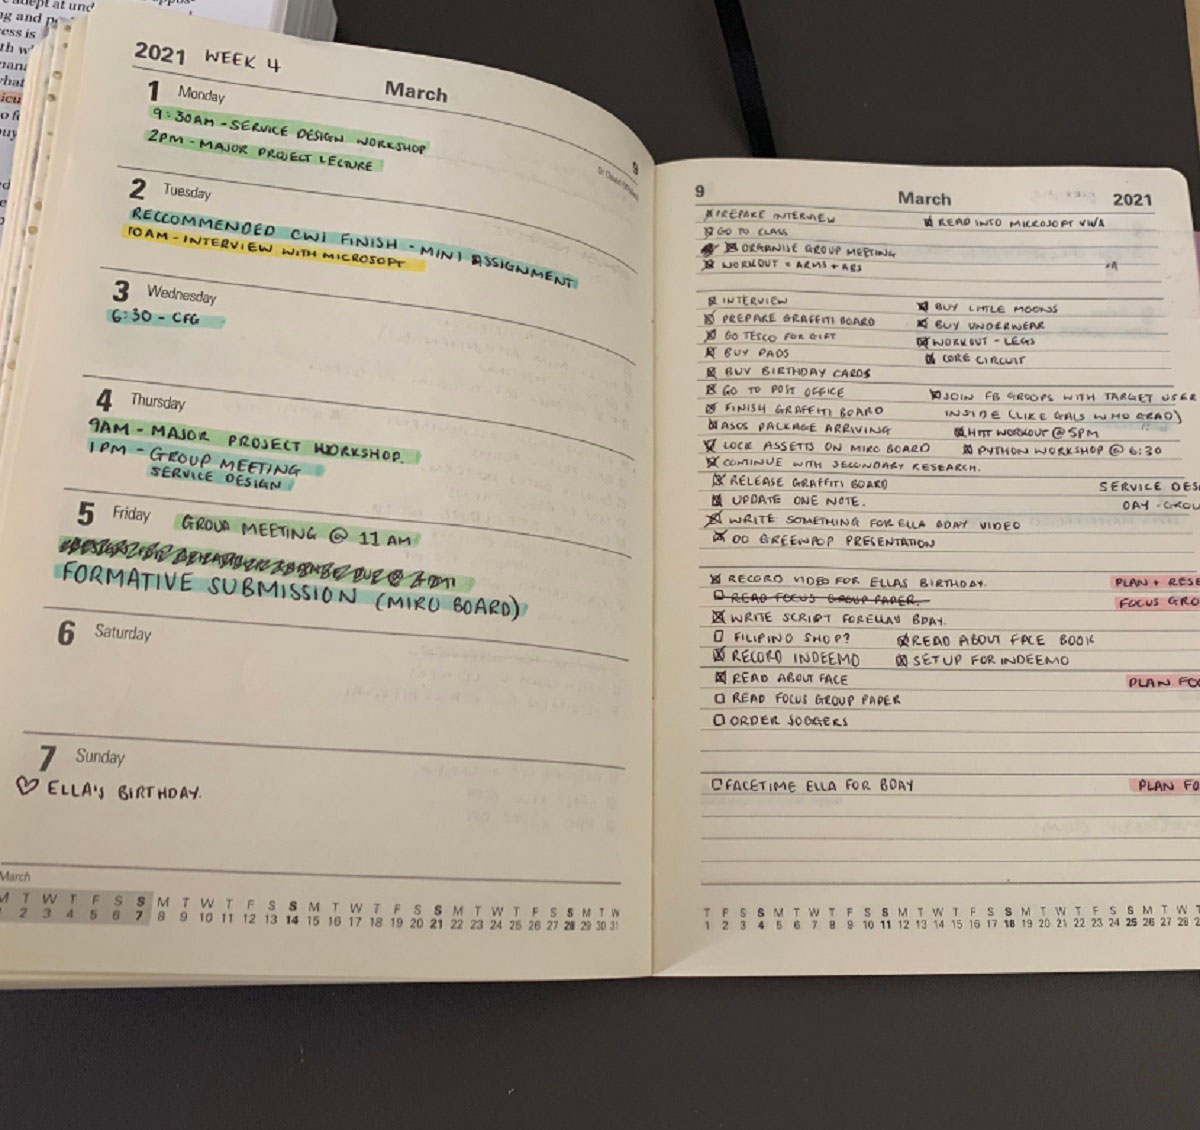 Lilymae's diary showing a week in March and the things that are happening on each day. 